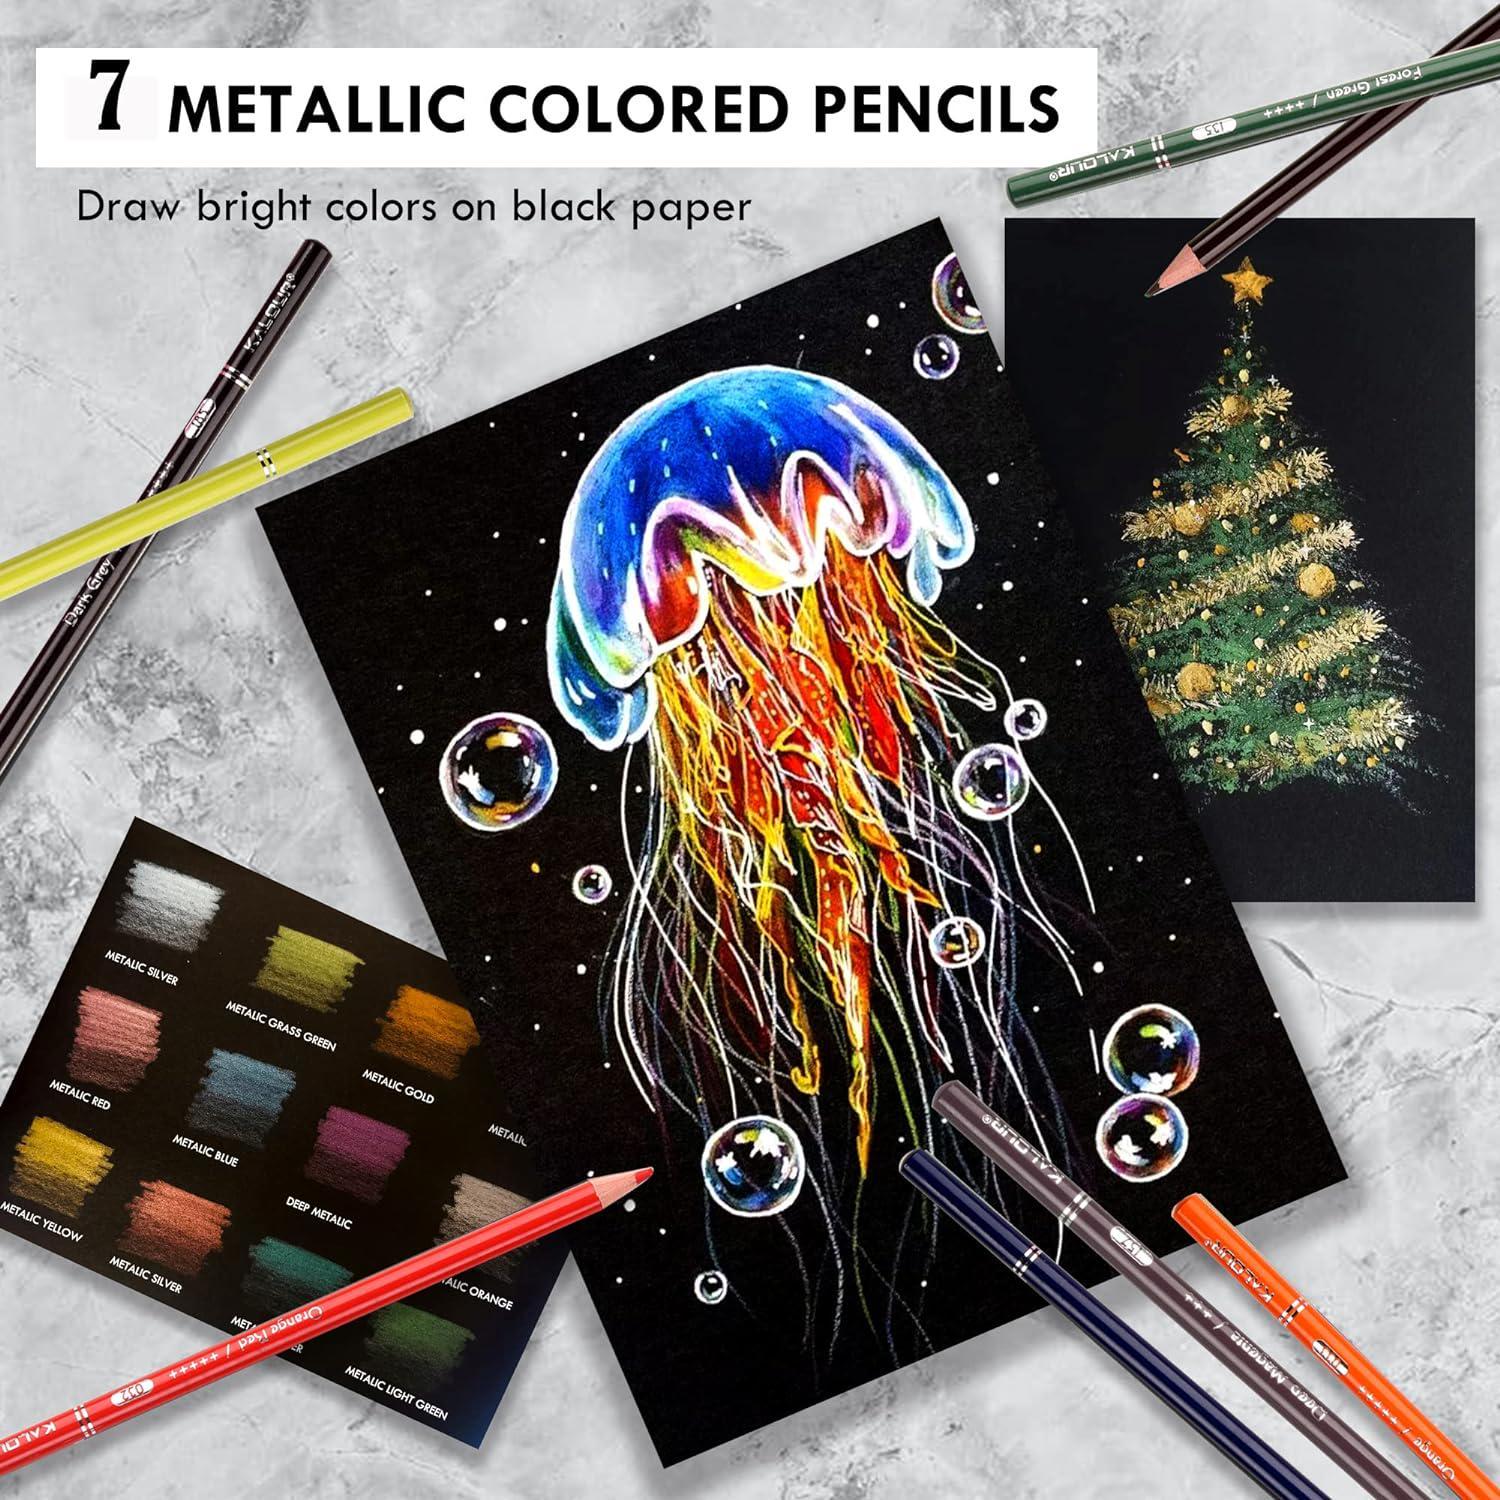  KALOUR Premium Colored Pencils,Set of 50 Colors,Artists Soft  Core with Vibrant Color,Ideal for Layering Blending Shading,Color Pencils  for Adults Beginners Coloring Book… : Arts, Crafts & Sewing